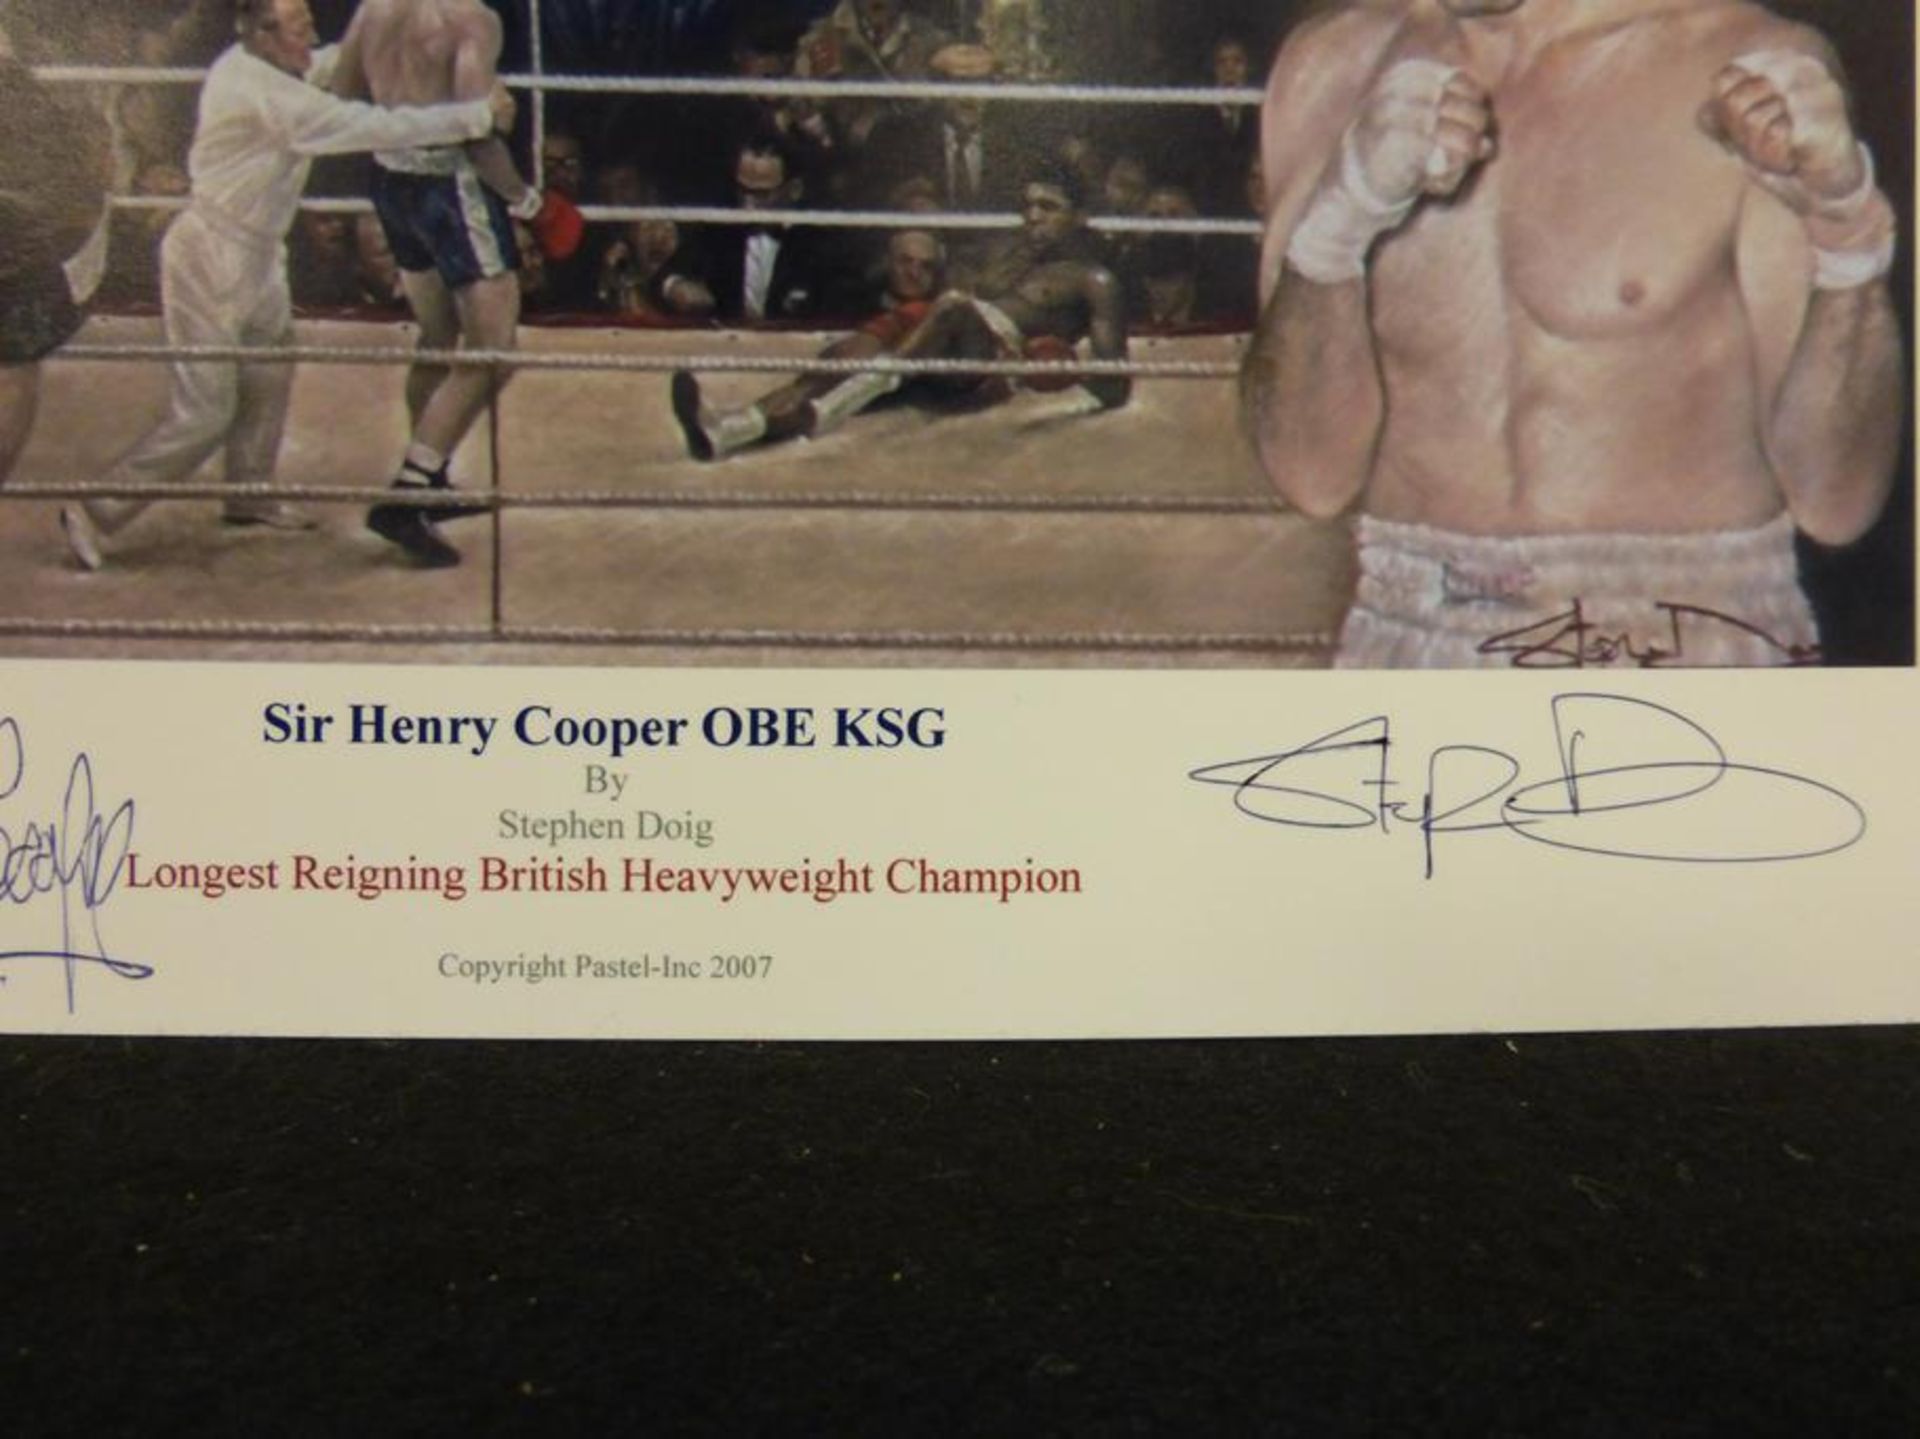 Sports Autographs: Collection of nine prints of boxers - Image 25 of 25